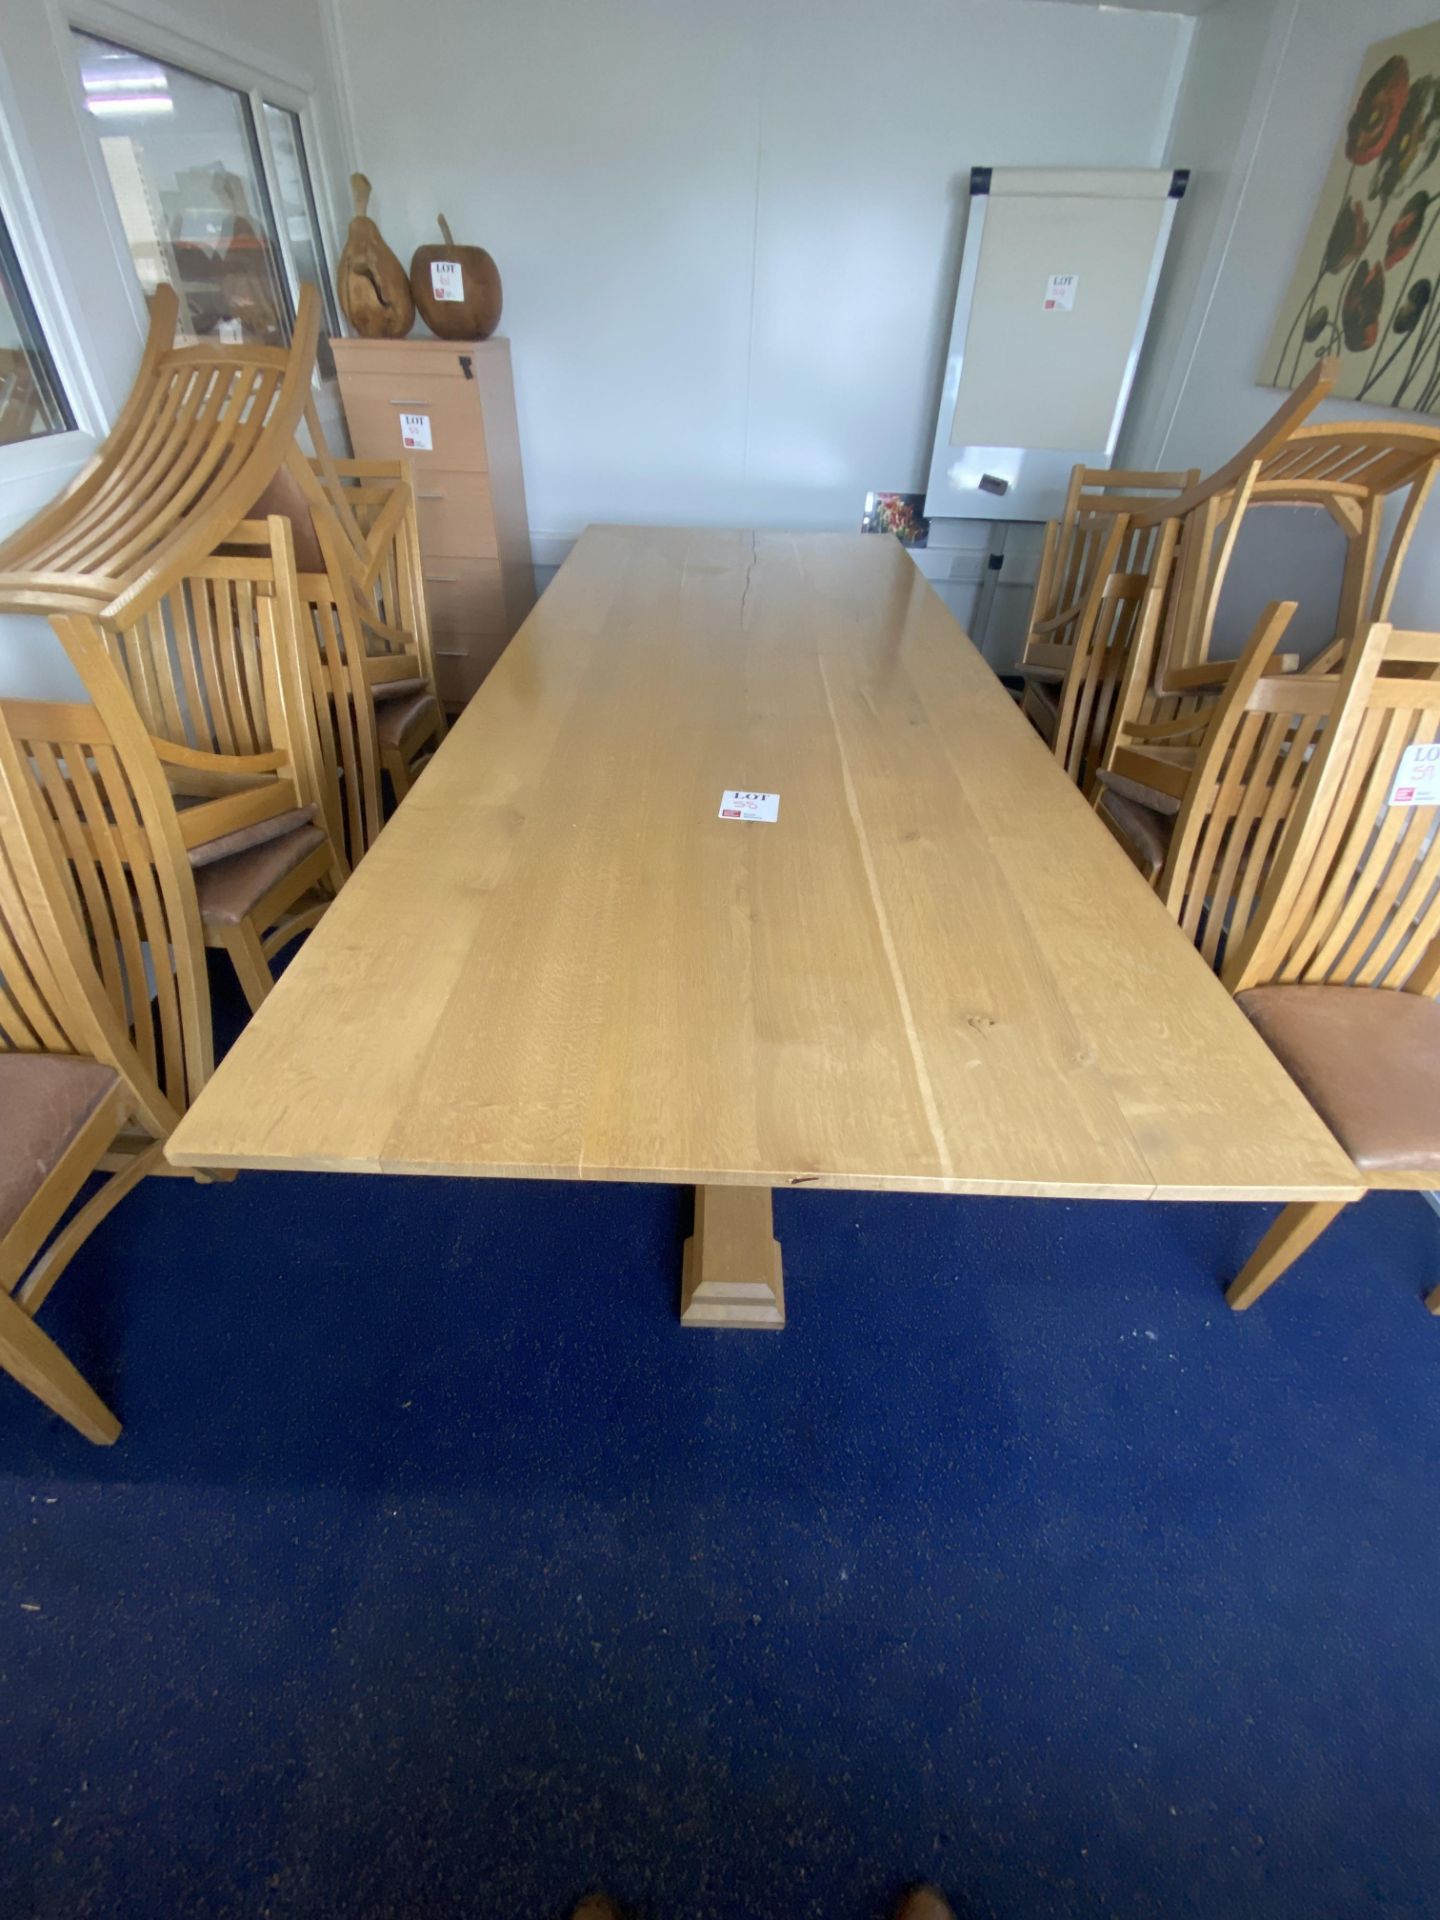 Wood effect dining table, height 73cm, length 2.97m, width 1.2m